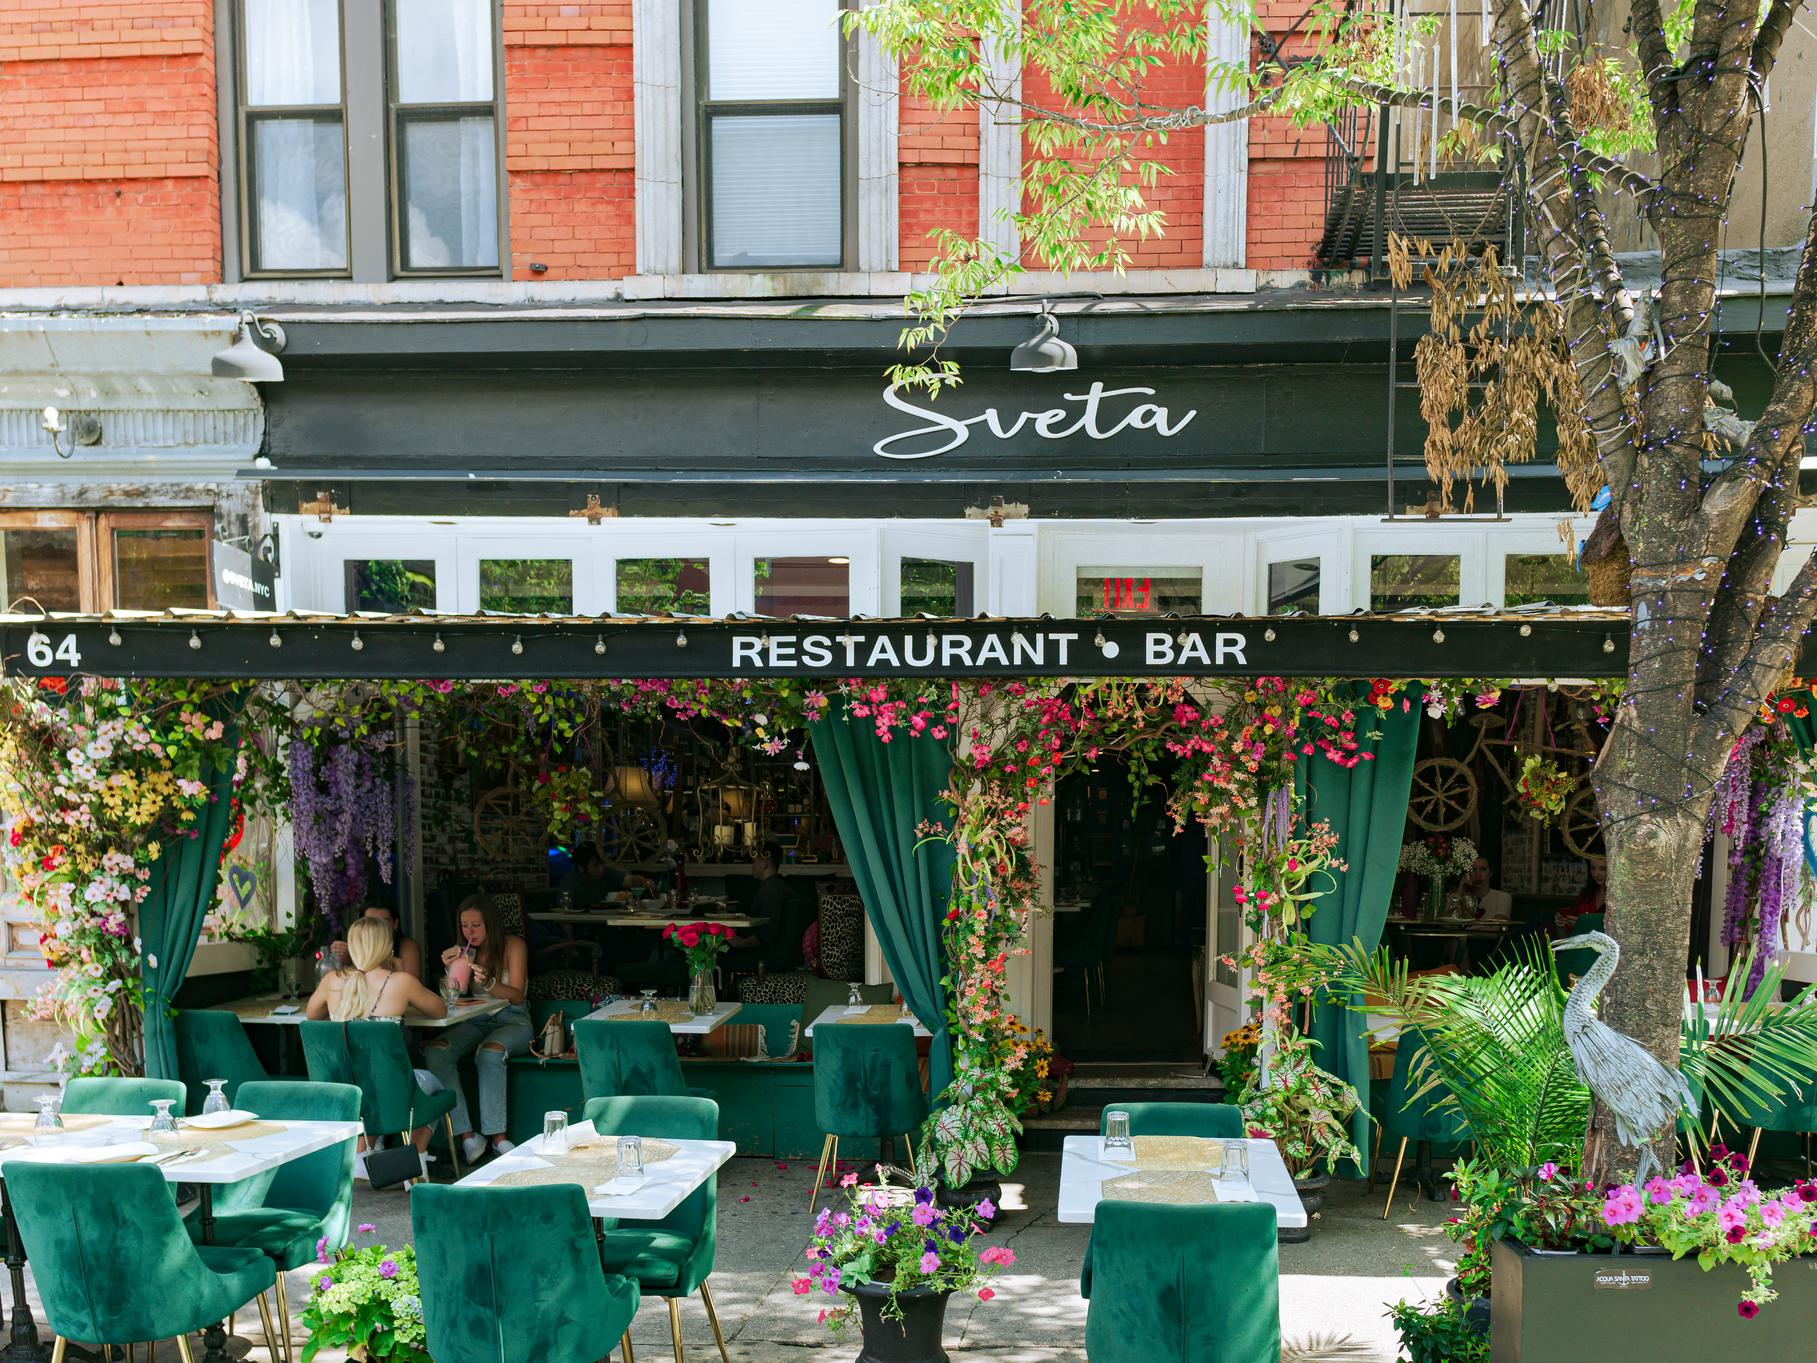 A photo of Sveta, a West Village restaurant that sells Ukrainian and Russian food. The building above the restaurant is red with two windows. The awning below that says "Sveta" in cursive script. Under that, it says "restaurant. bar." The chairs on the sidewalk in front of the building are green and the tables are white. There is a tree to the right of the photo.